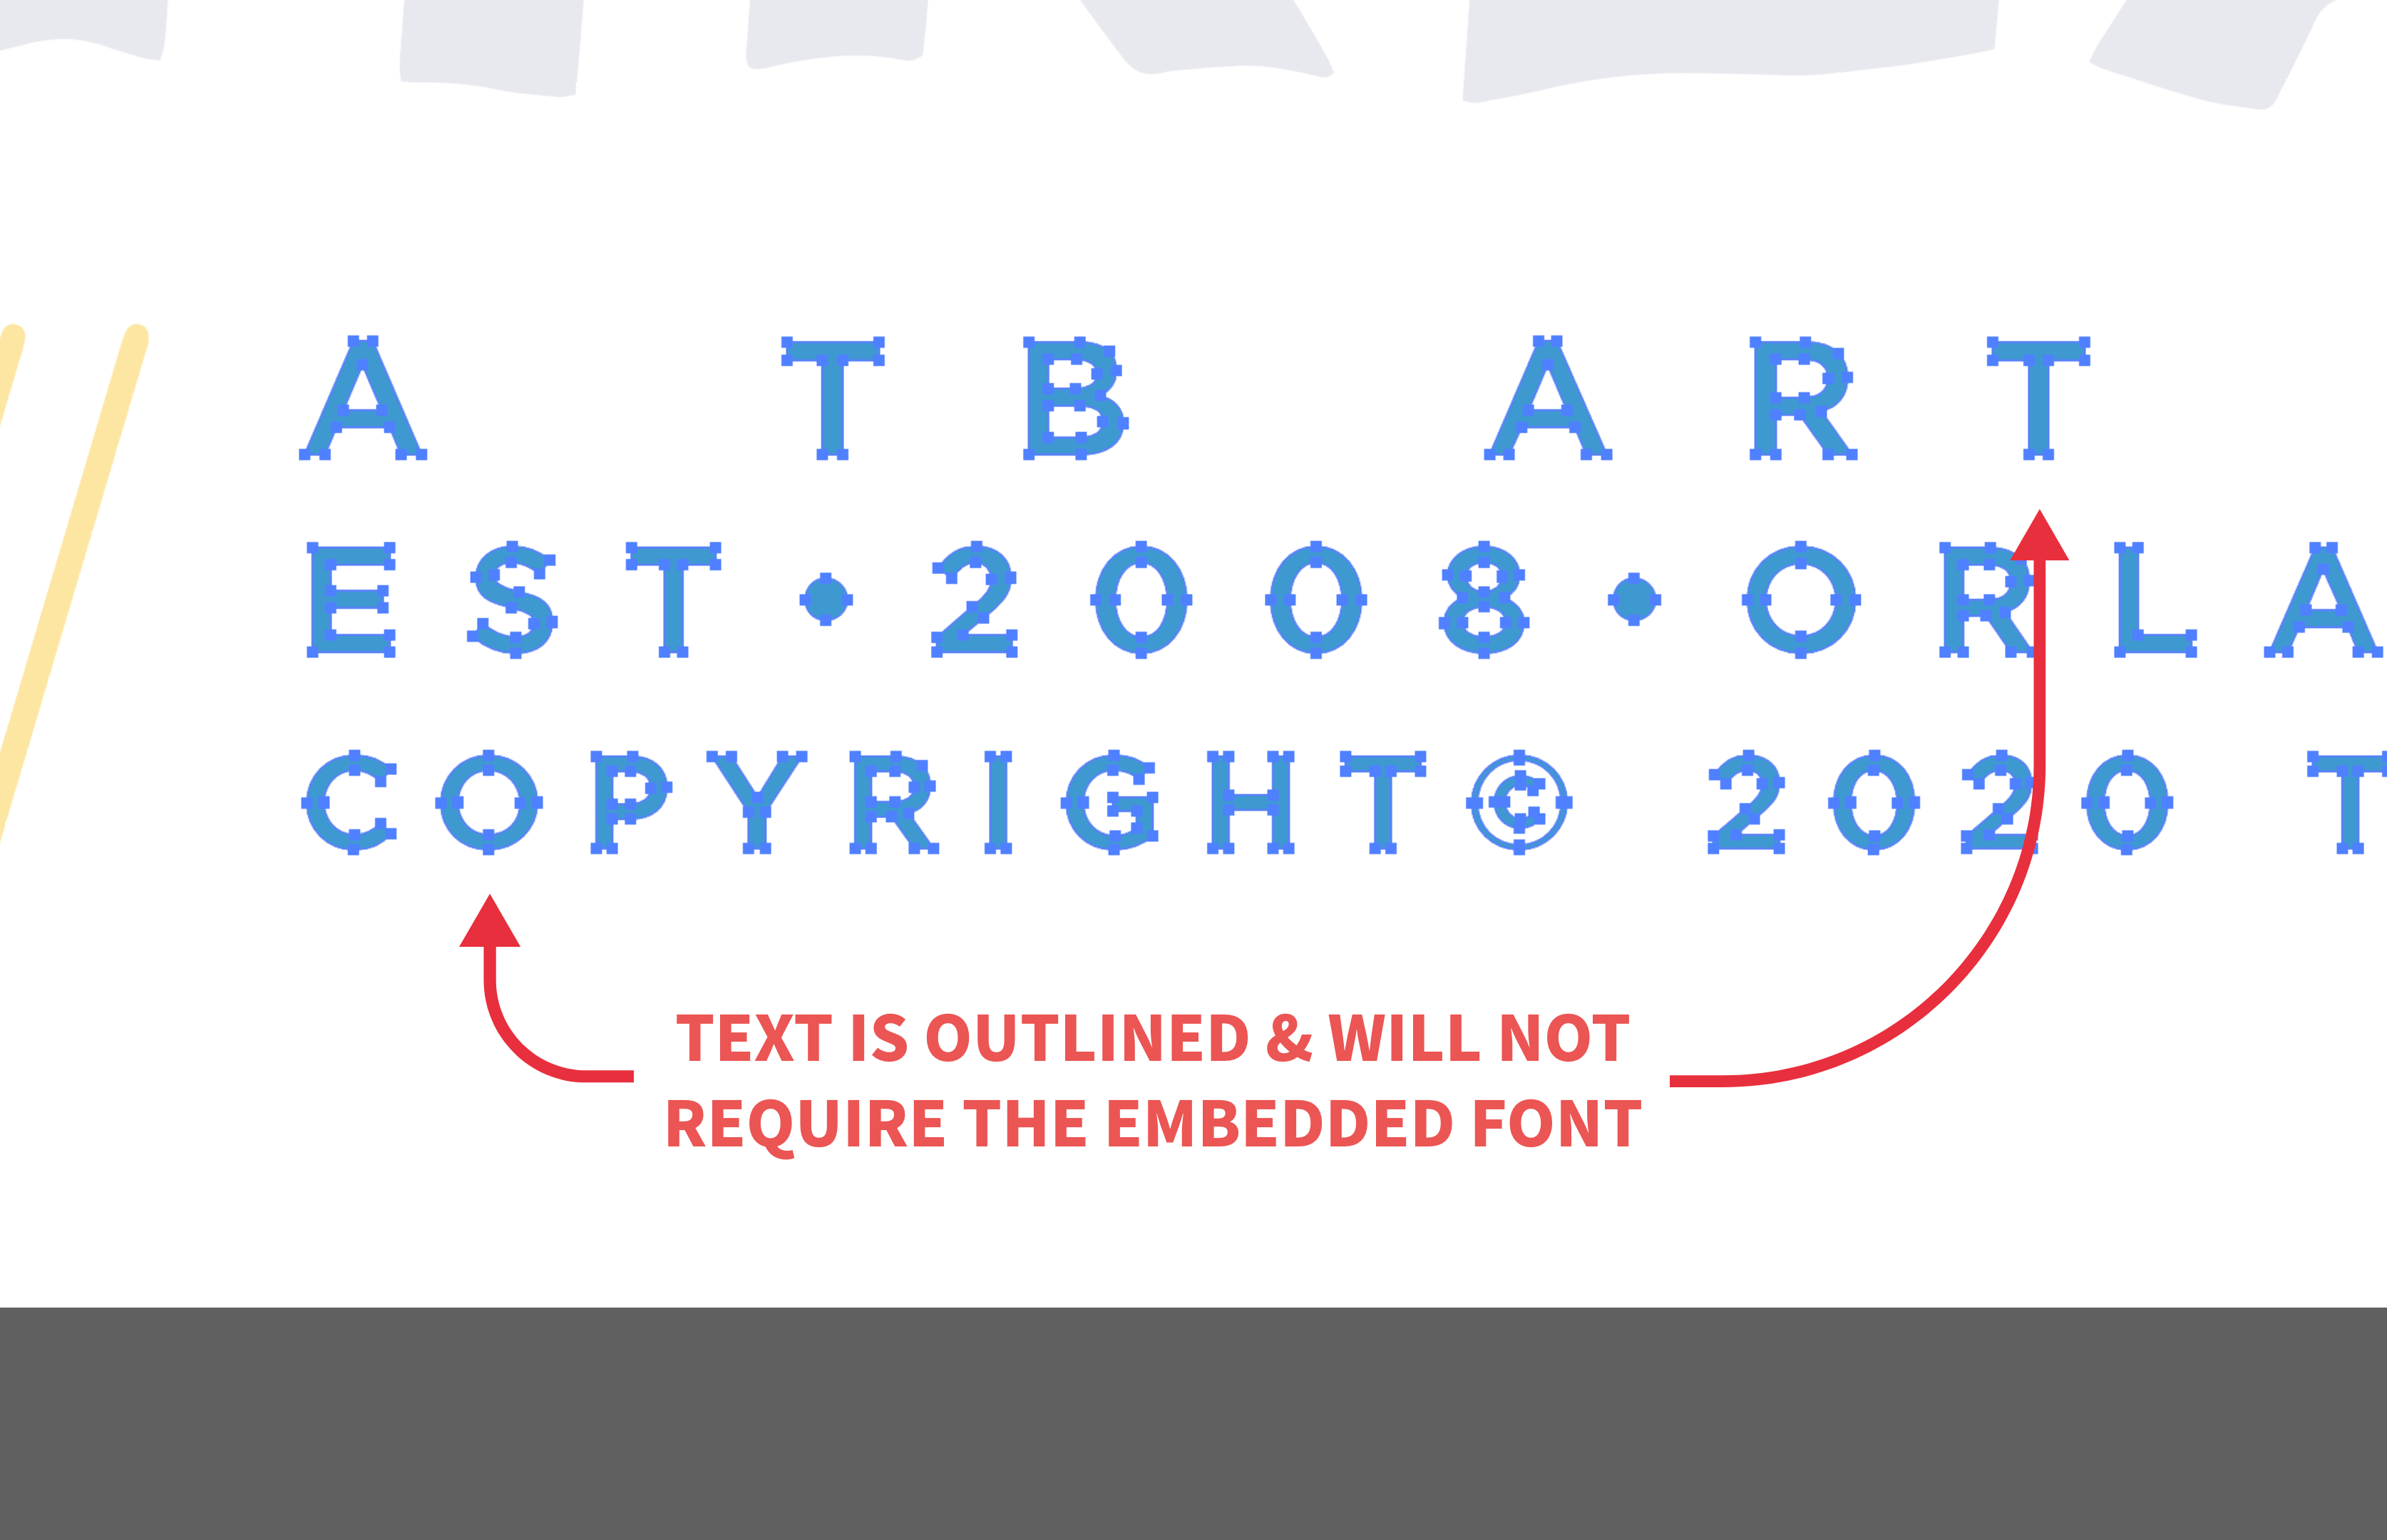 Outlining Fonts